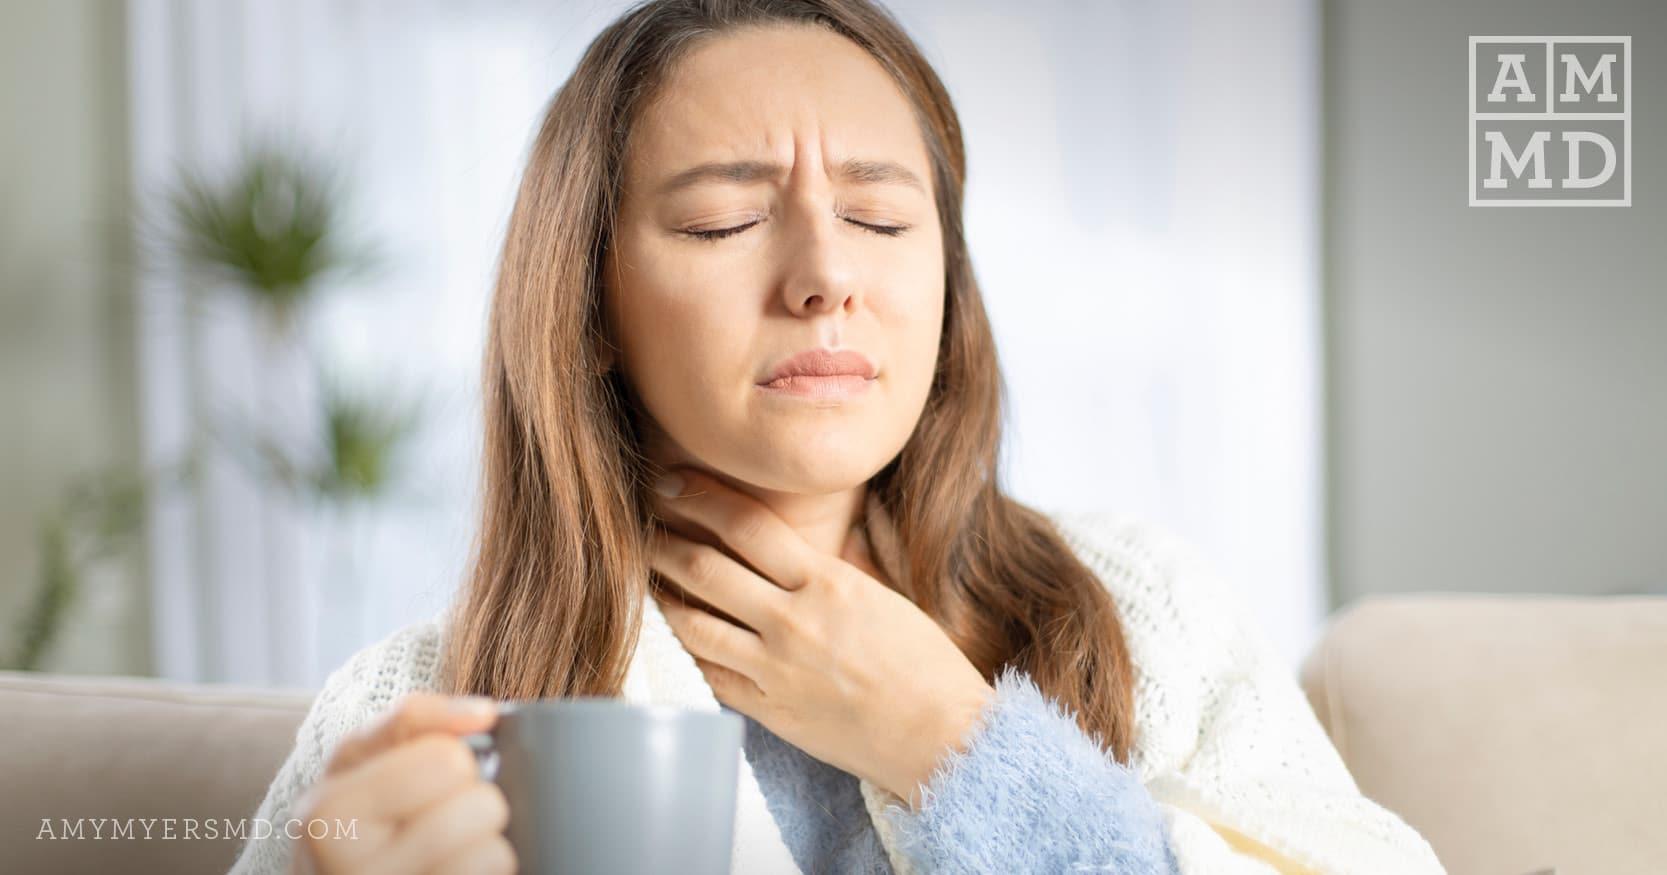 Cold and Flu Season Tips - Article - Amy Myers MD